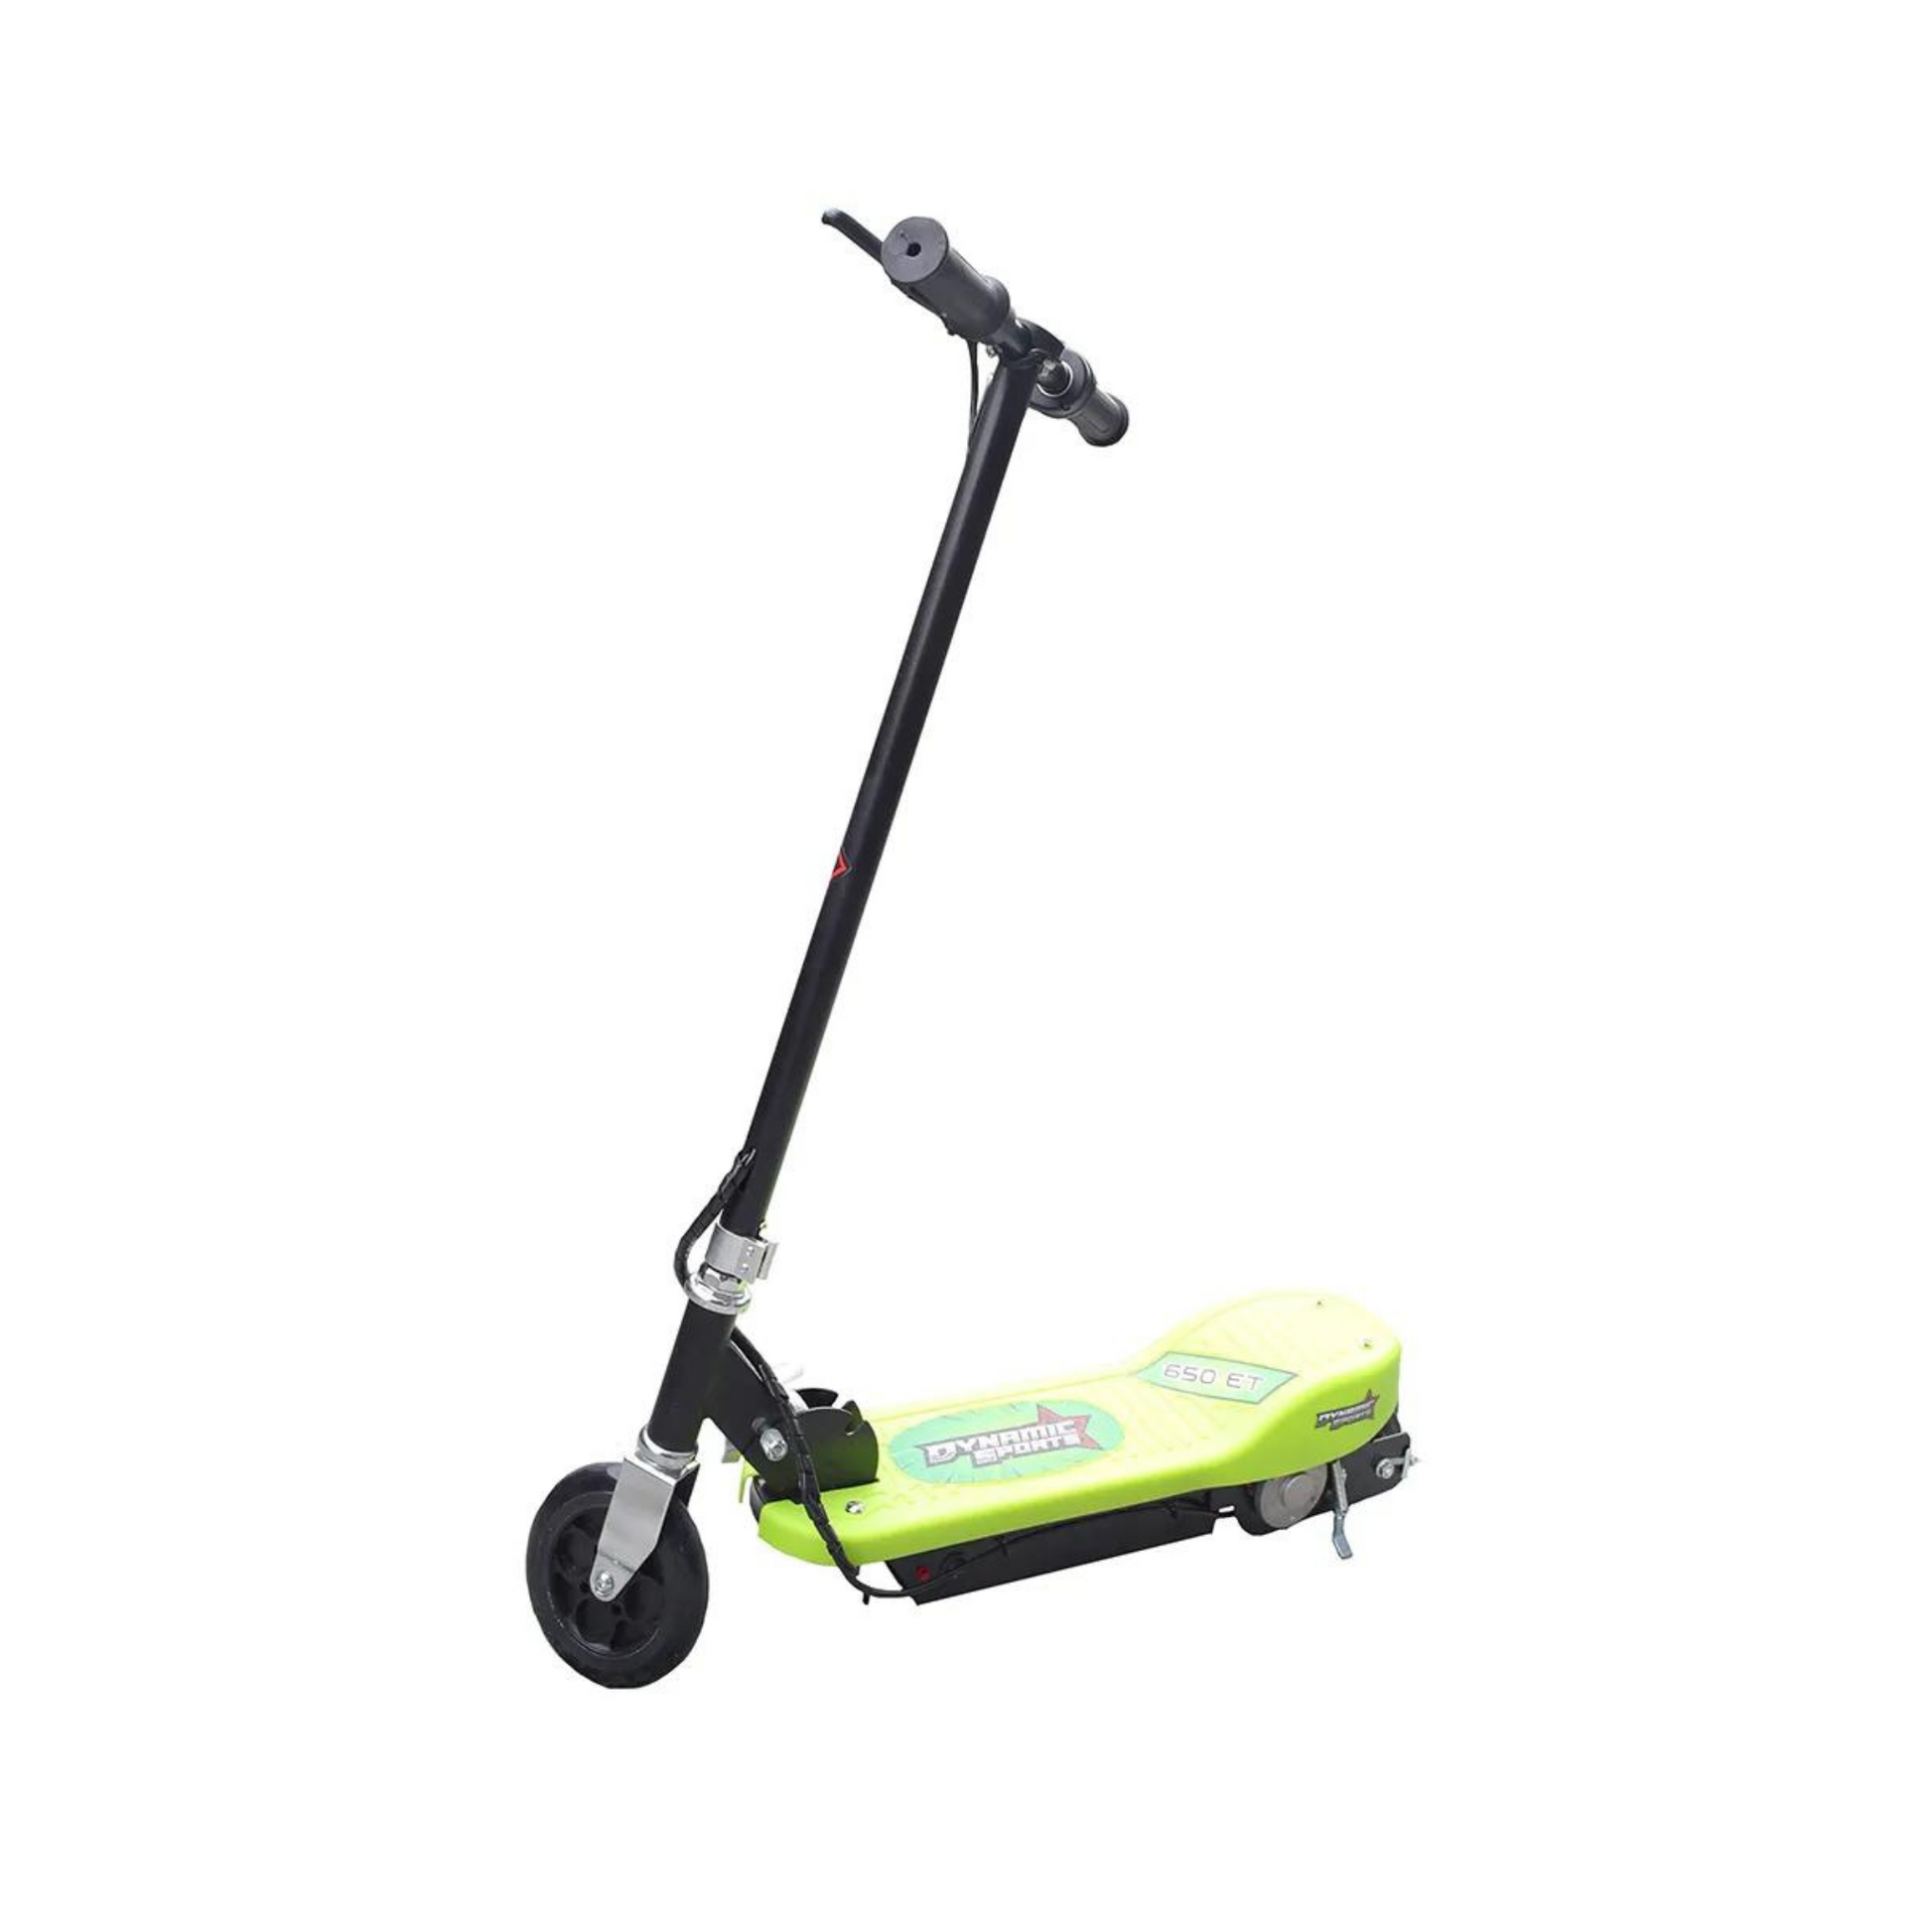 Dynamic Sports Electric Scooter